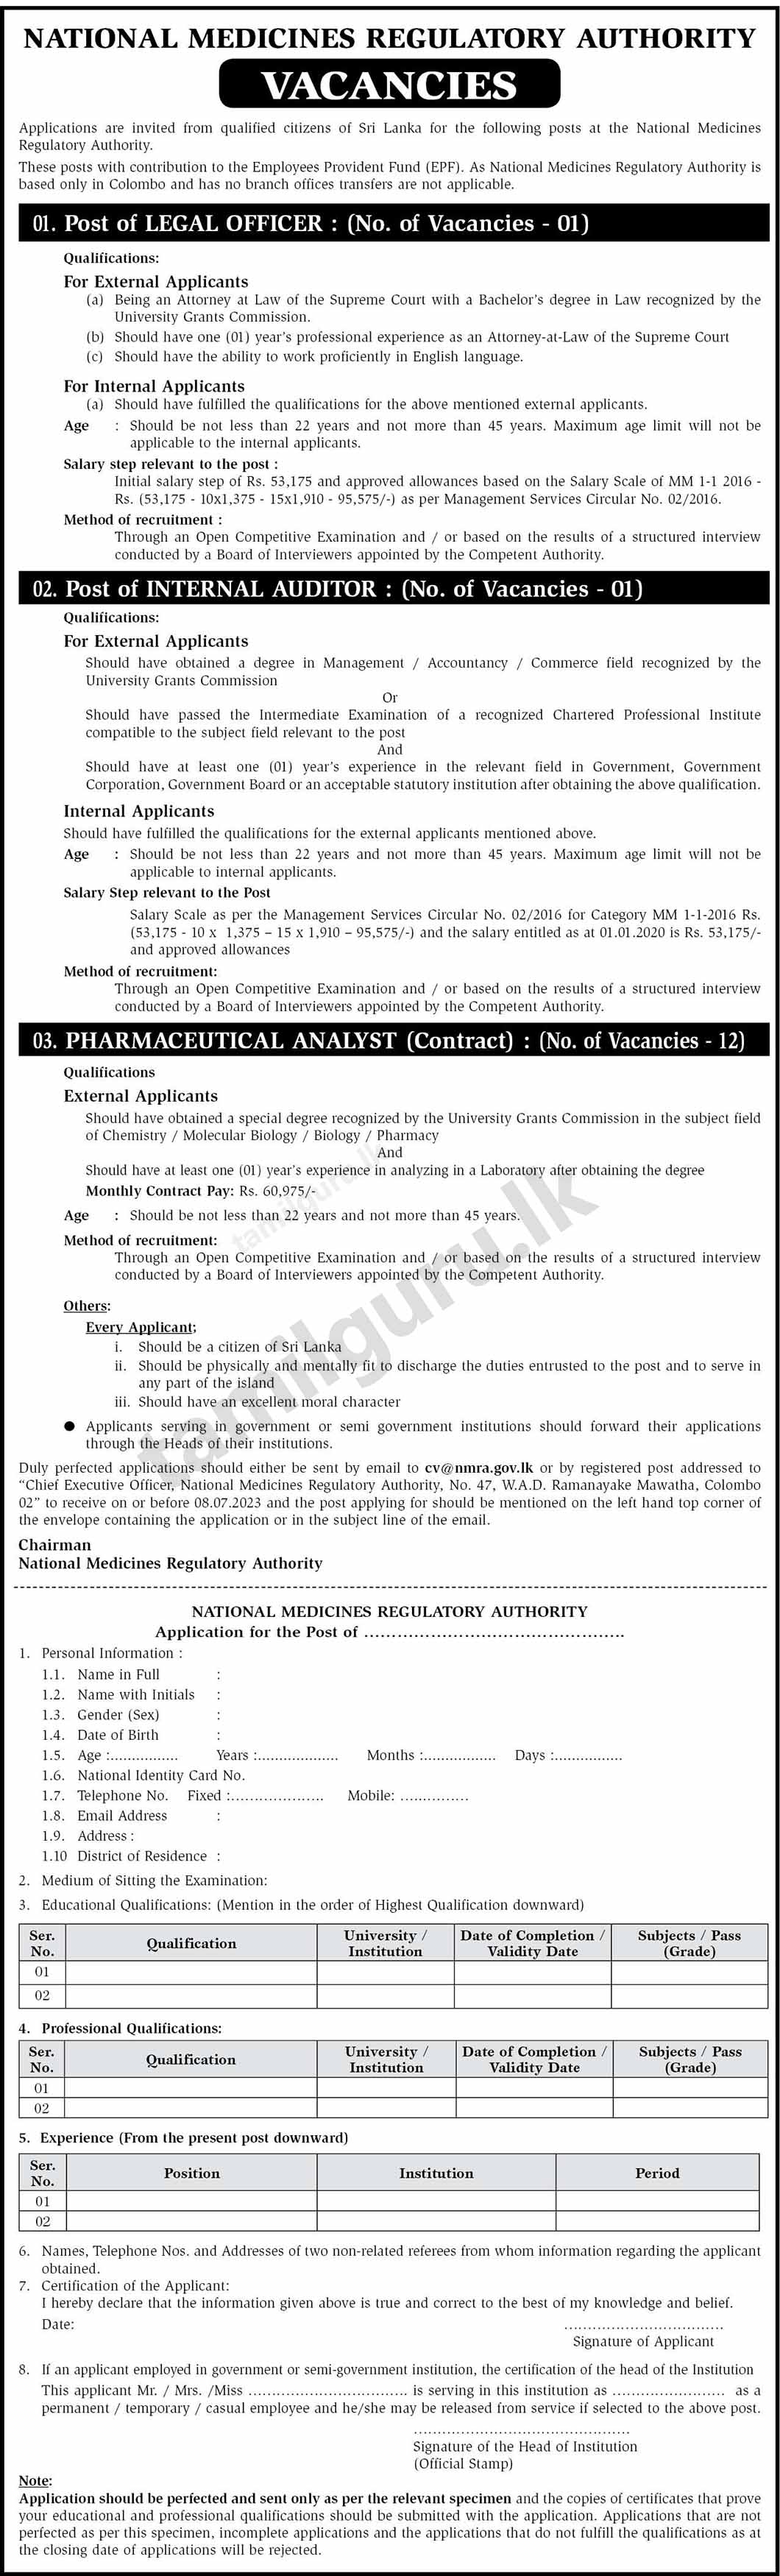 National Medicines Regulatory Authority (NMRA) Vacancies (2023) -  Legal Officer, Internal Auditor, Pharmaceutical Analyst